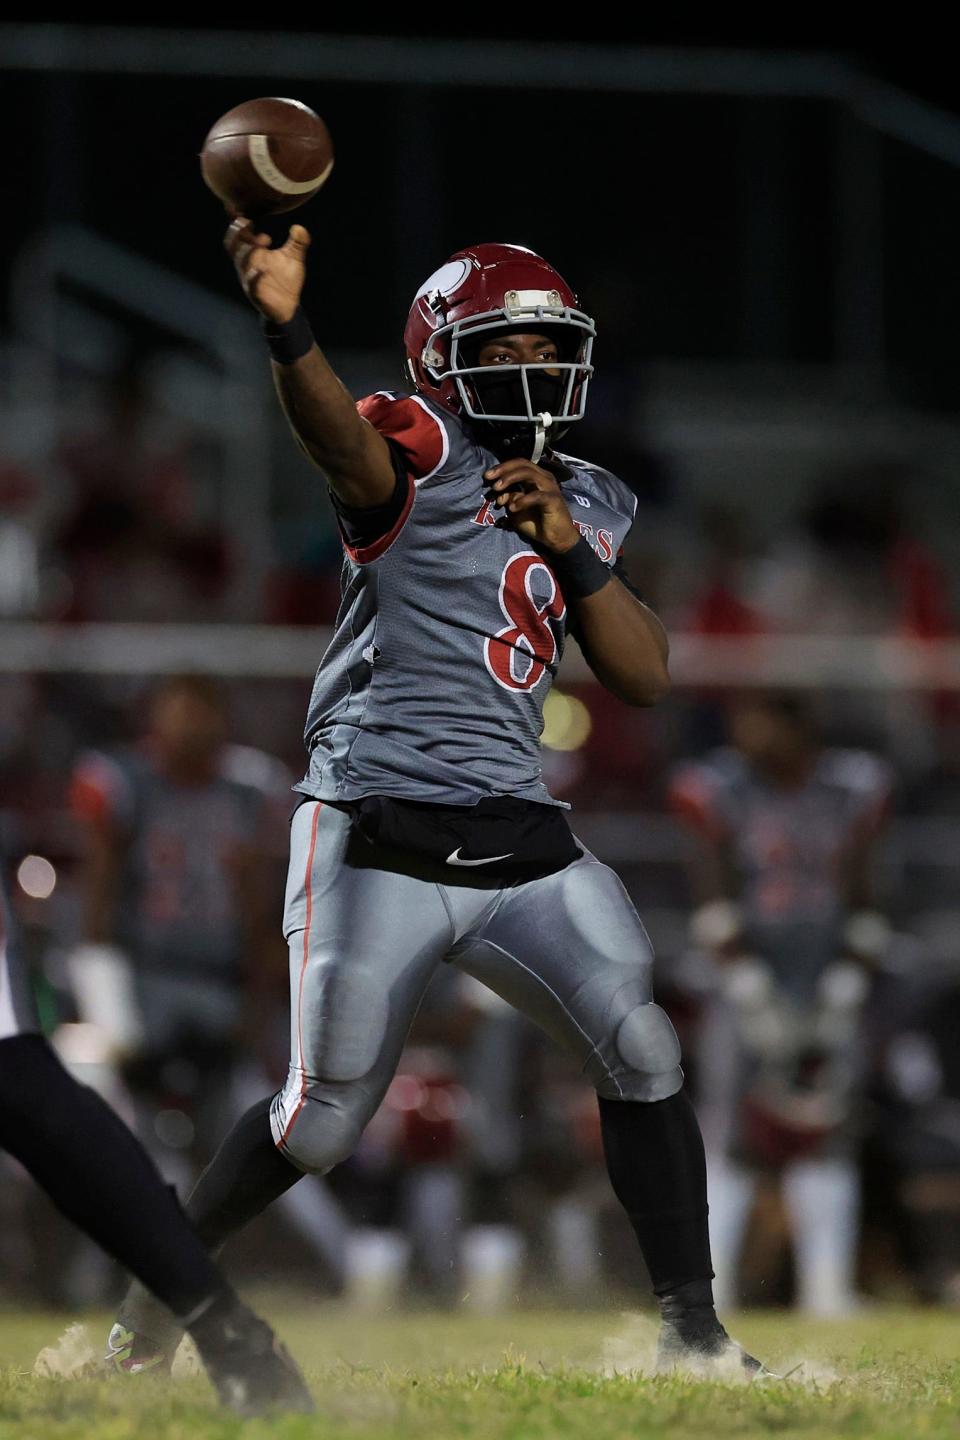 Raines' Roman Doles (8) looks to throw during an October game at Atlantic Coast. The senior quarterback committed to Bethune-Cookman football.